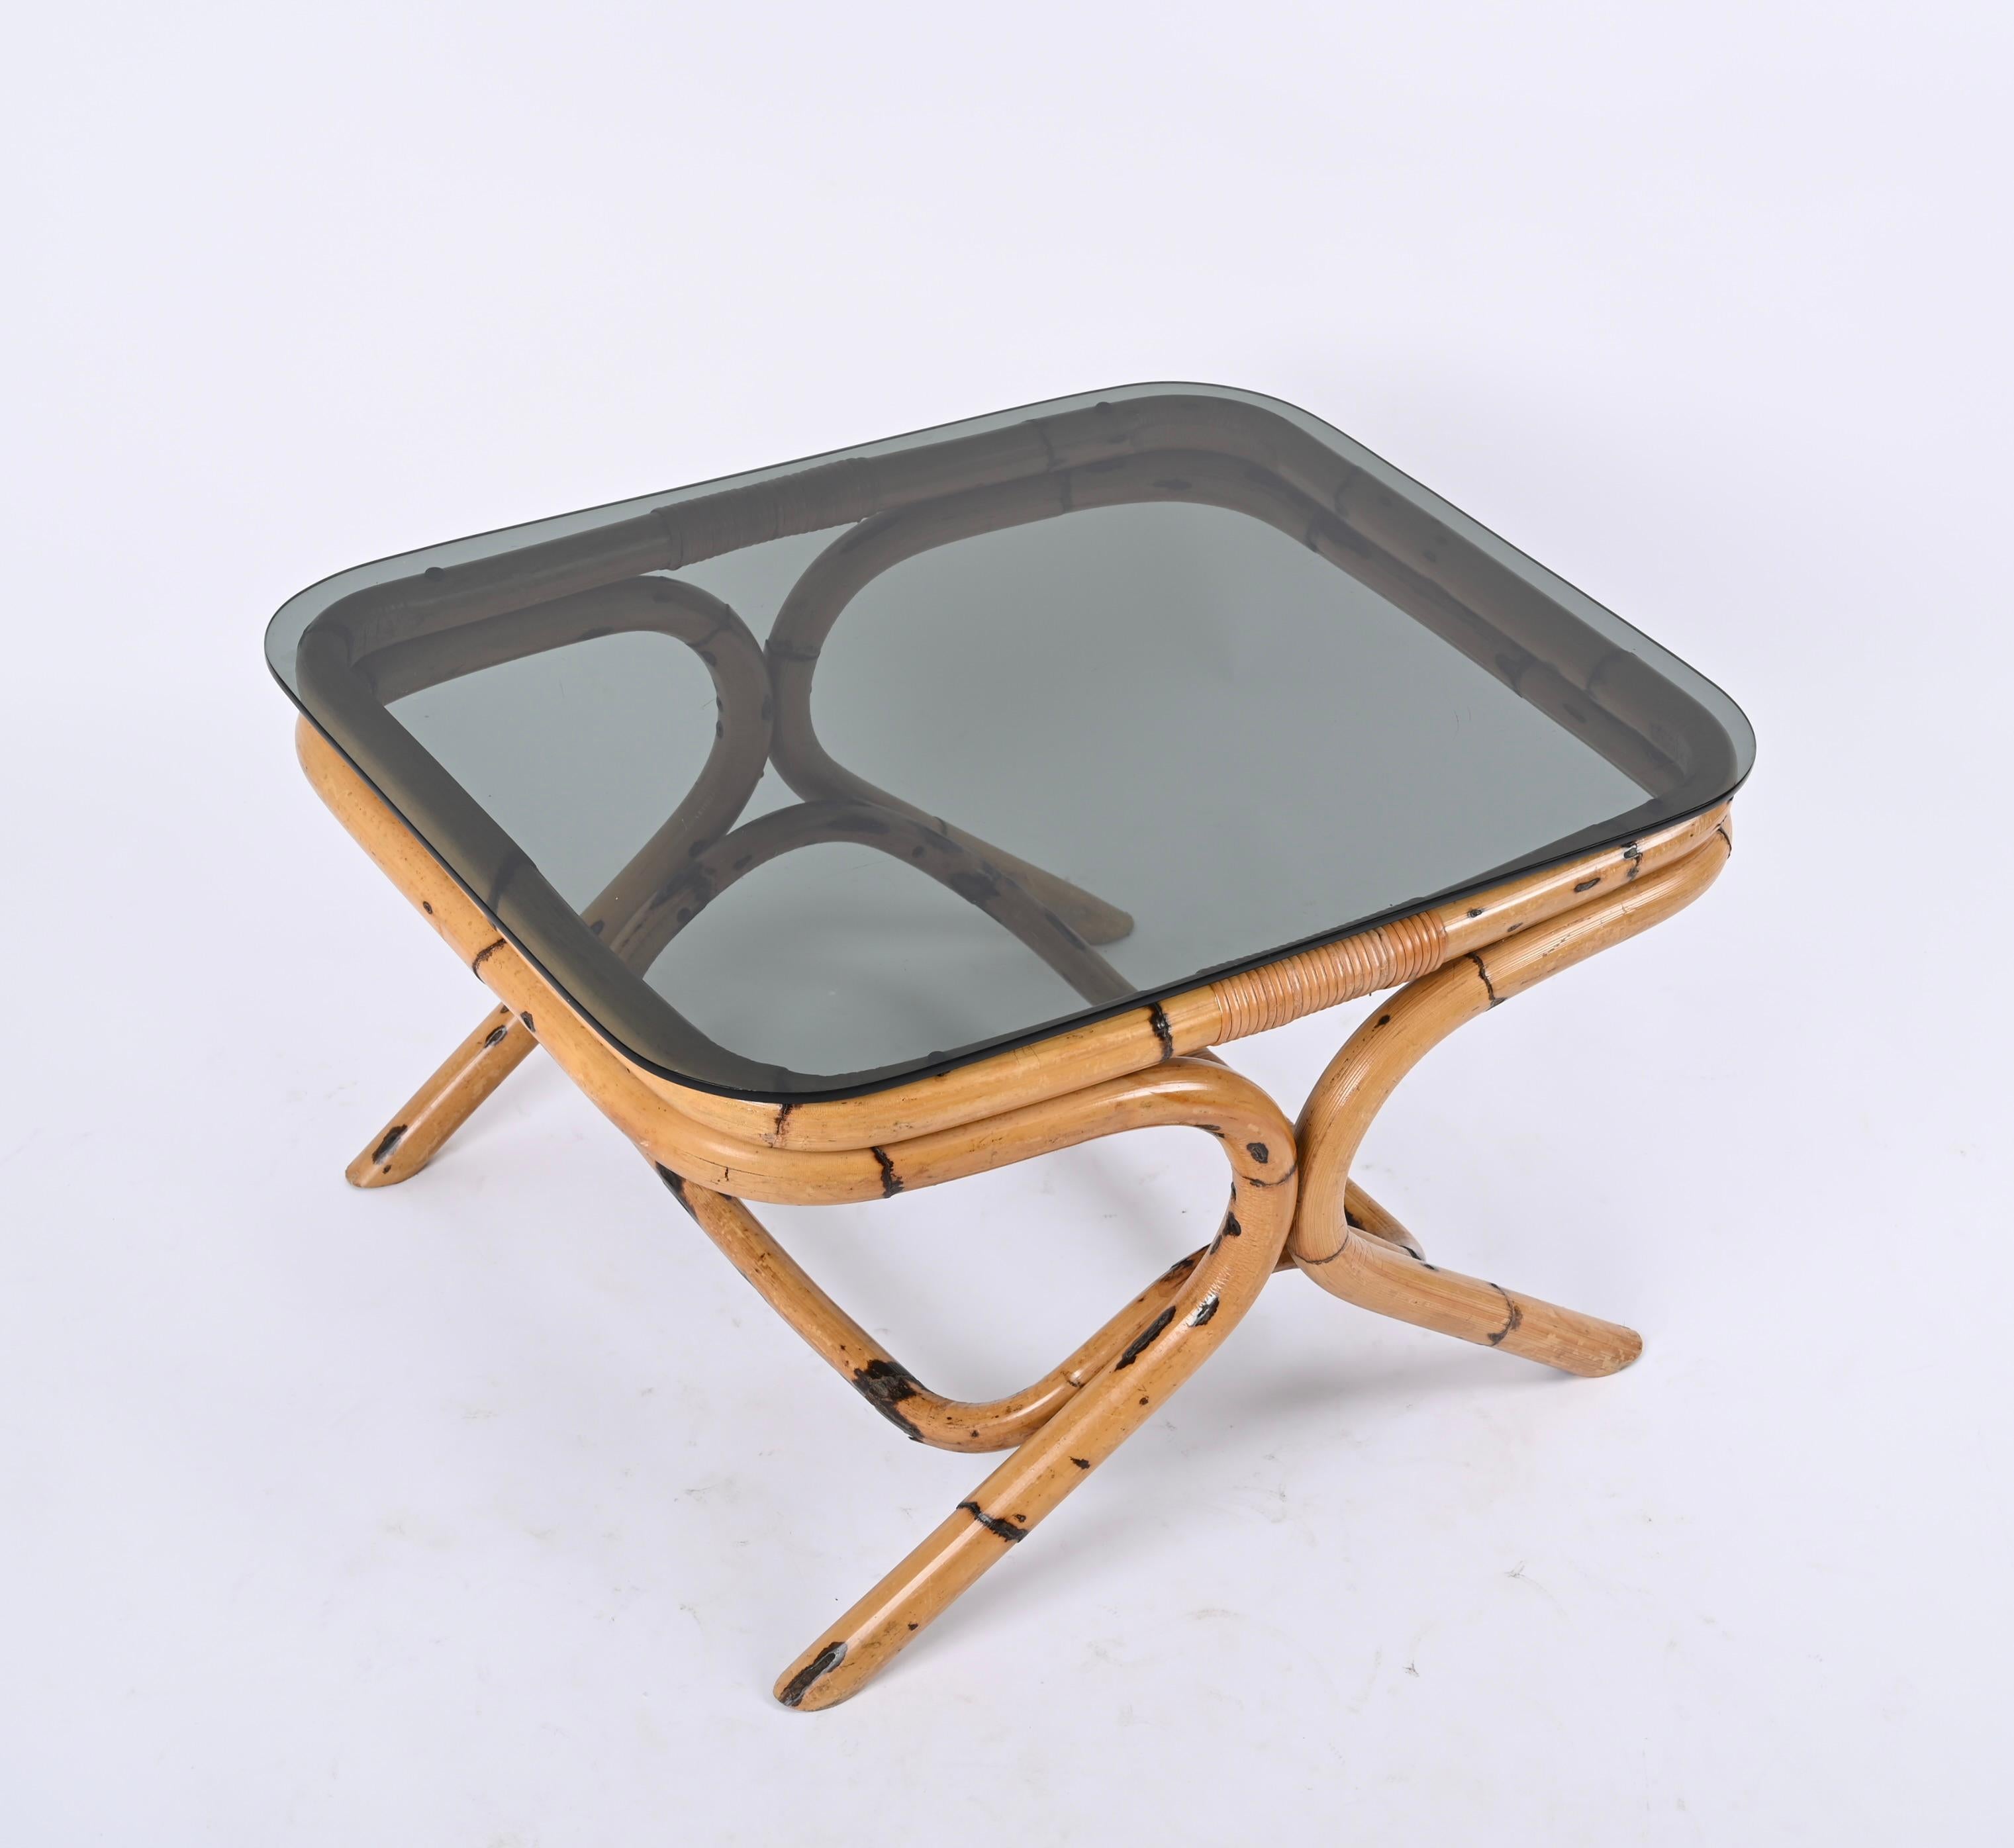 Vivai del Sud Bamboo and Rattan Coffee Table with Smoked Glass, Italy, 1960s For Sale 1